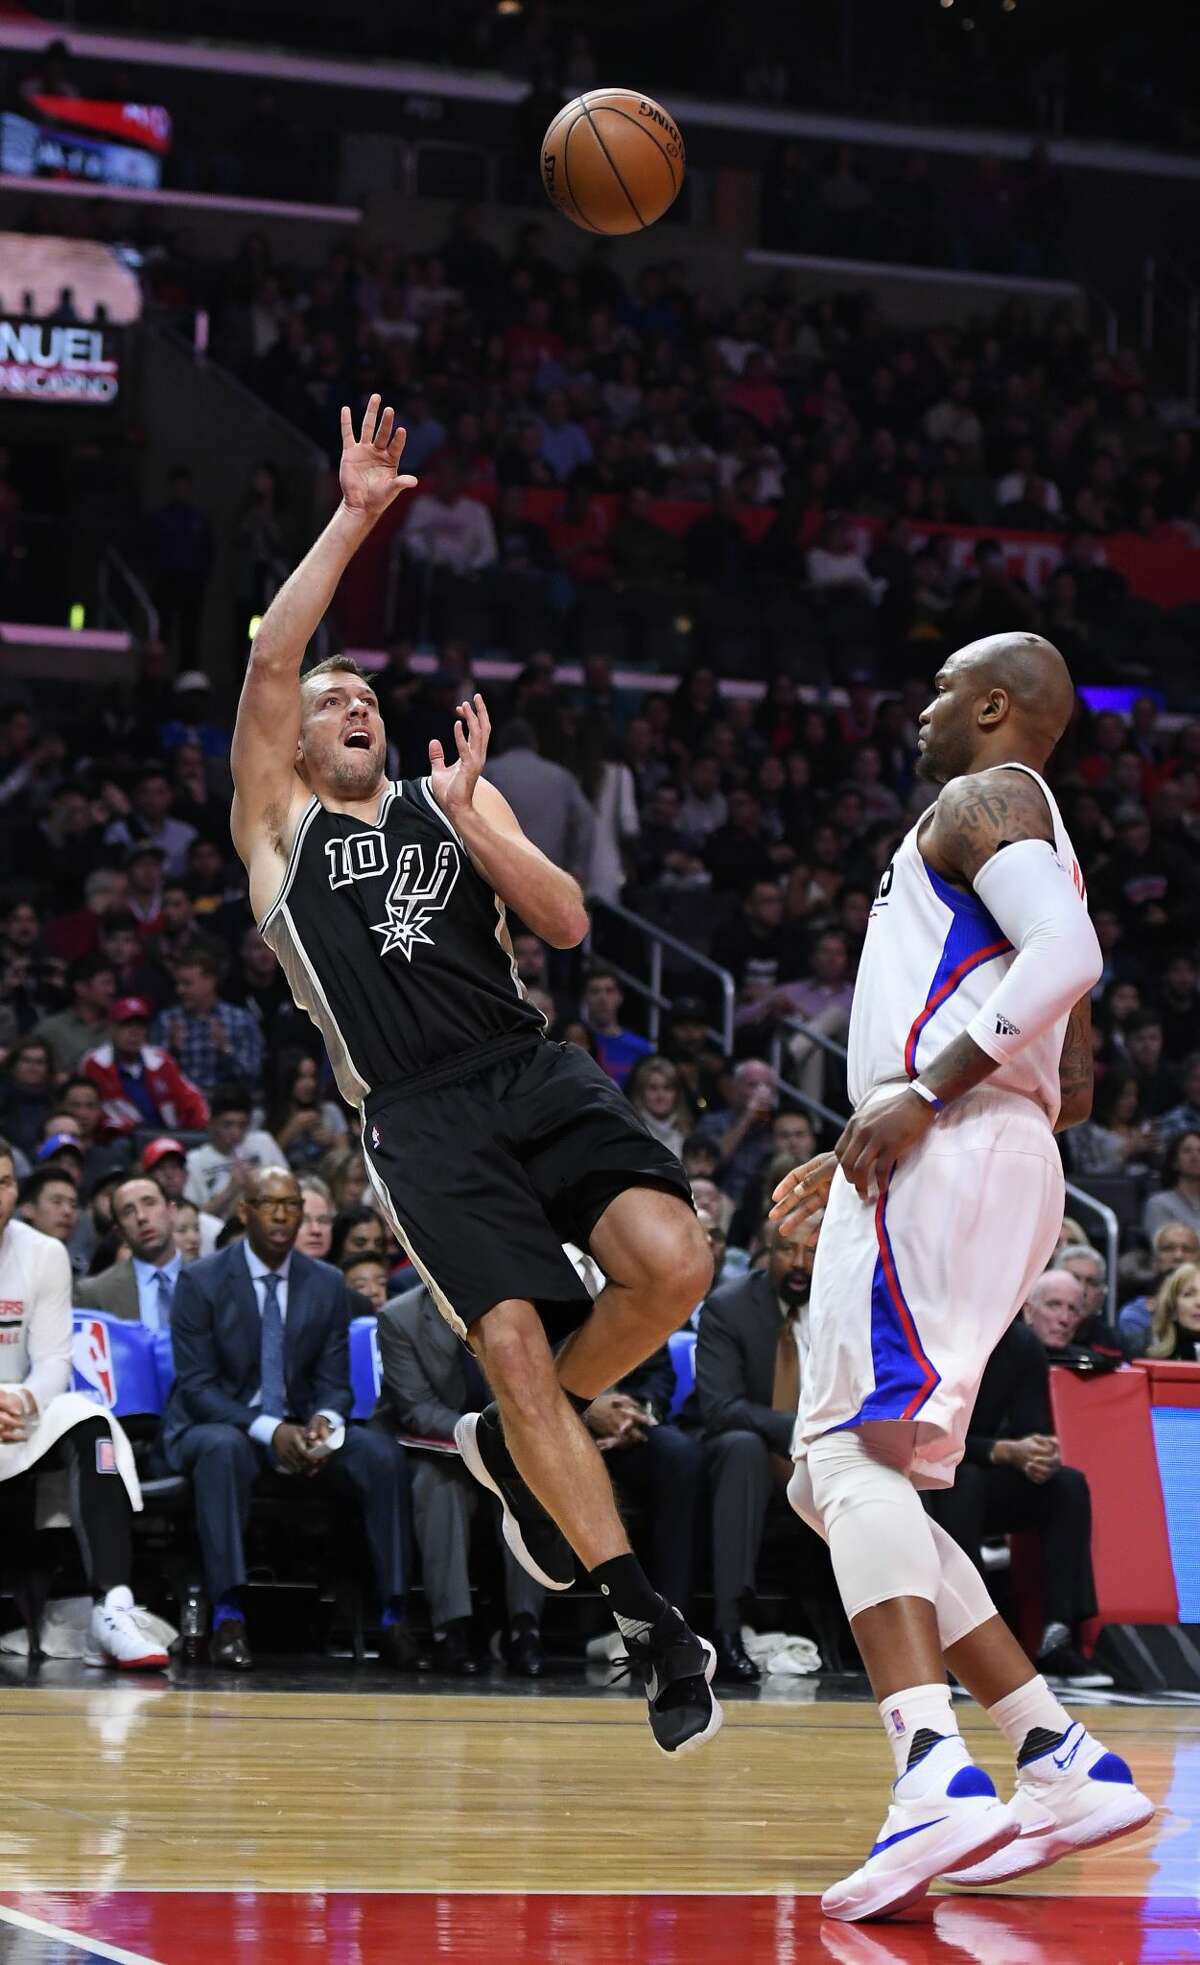 San Antonio Spurs forward David Lee, left, shoots as Los Angeles Clippers center Marreese Speights defends during the first half of an NBA basketball game, Friday, Feb. 24, 2017, in Los Angeles. (AP Photo/Mark J. Terrill)